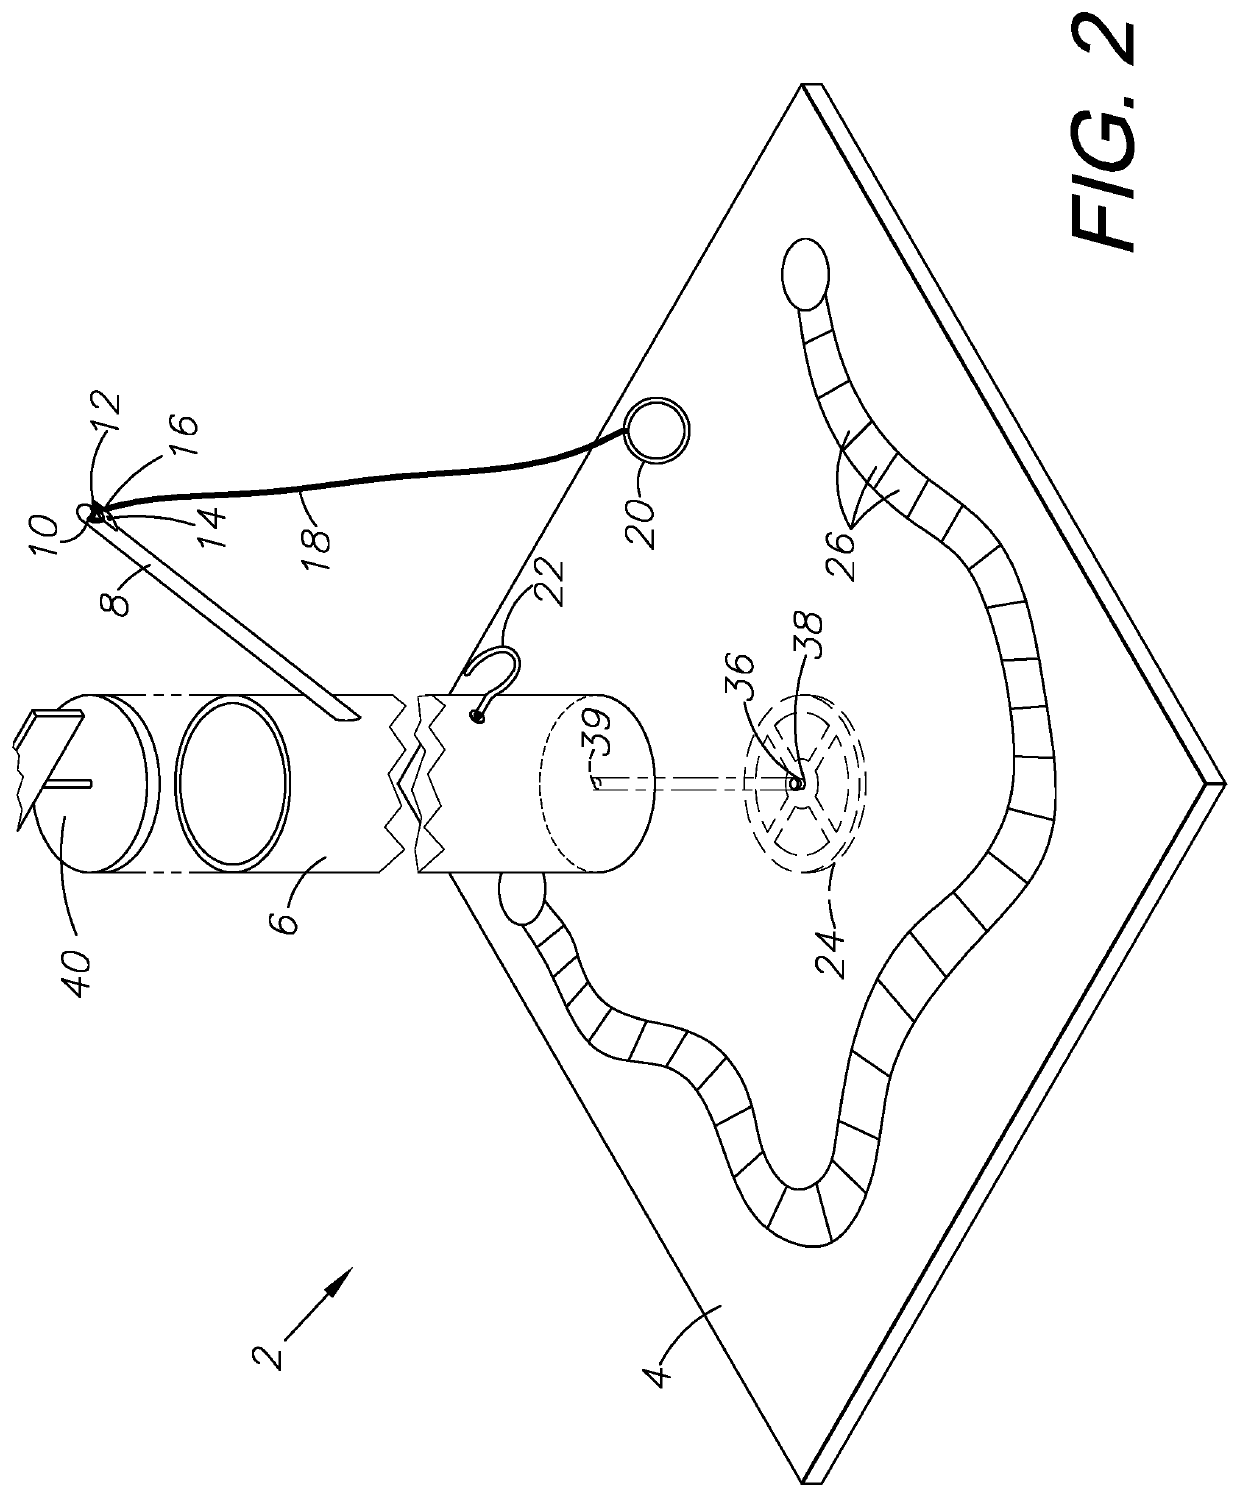 Board game system. method of use, and method of assembly